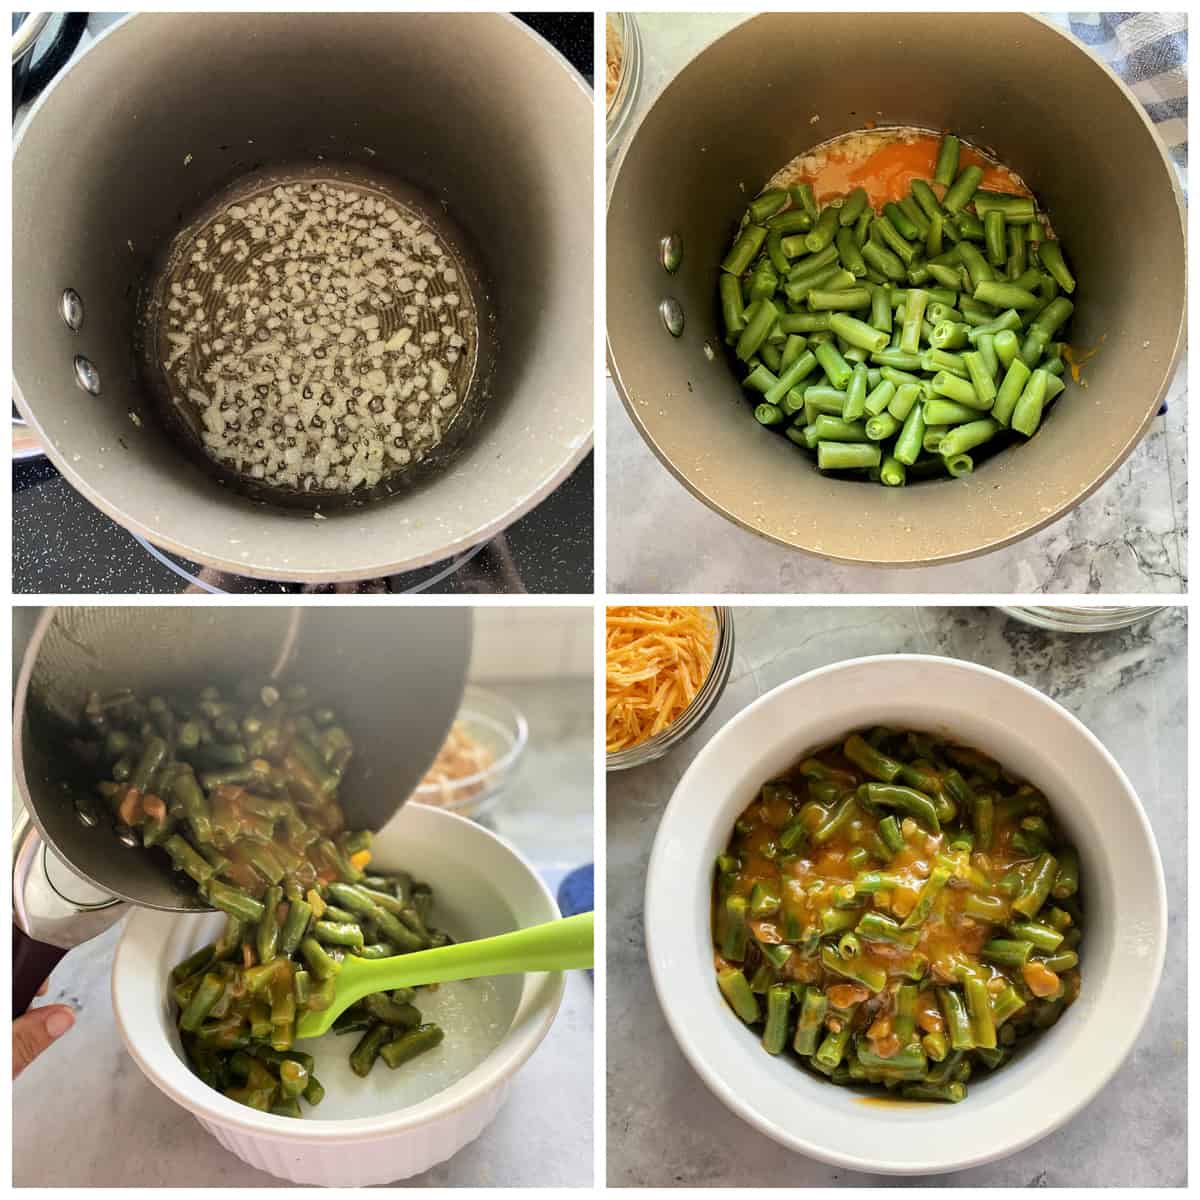 Four photos: Top left sauted onions in pot, top right green beans, bottom left; green beans pouring in dish, bottom right green beans in casserole dish.